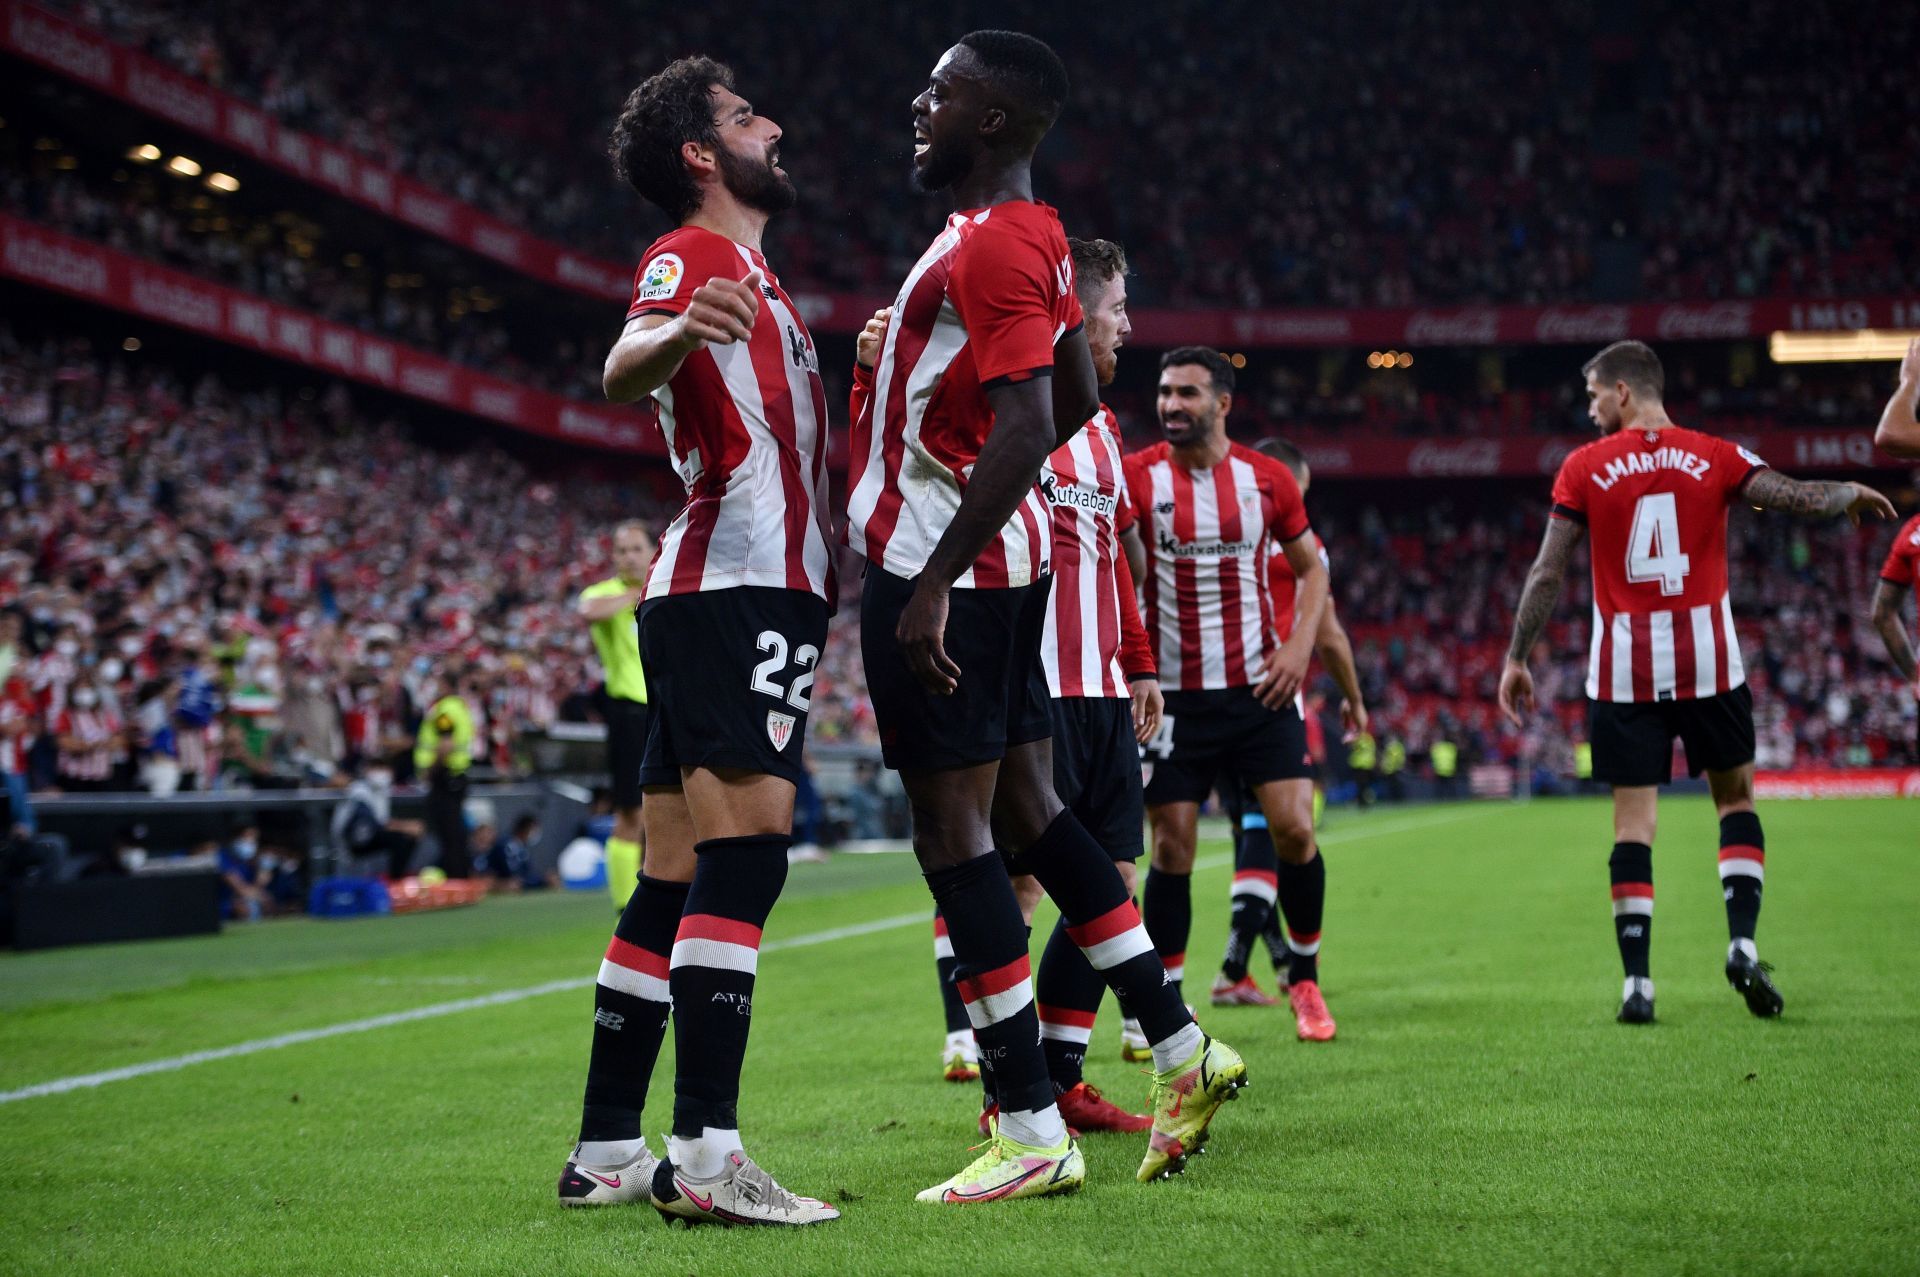 Athletic Bilbao take on Deportivo Alaves this weekend